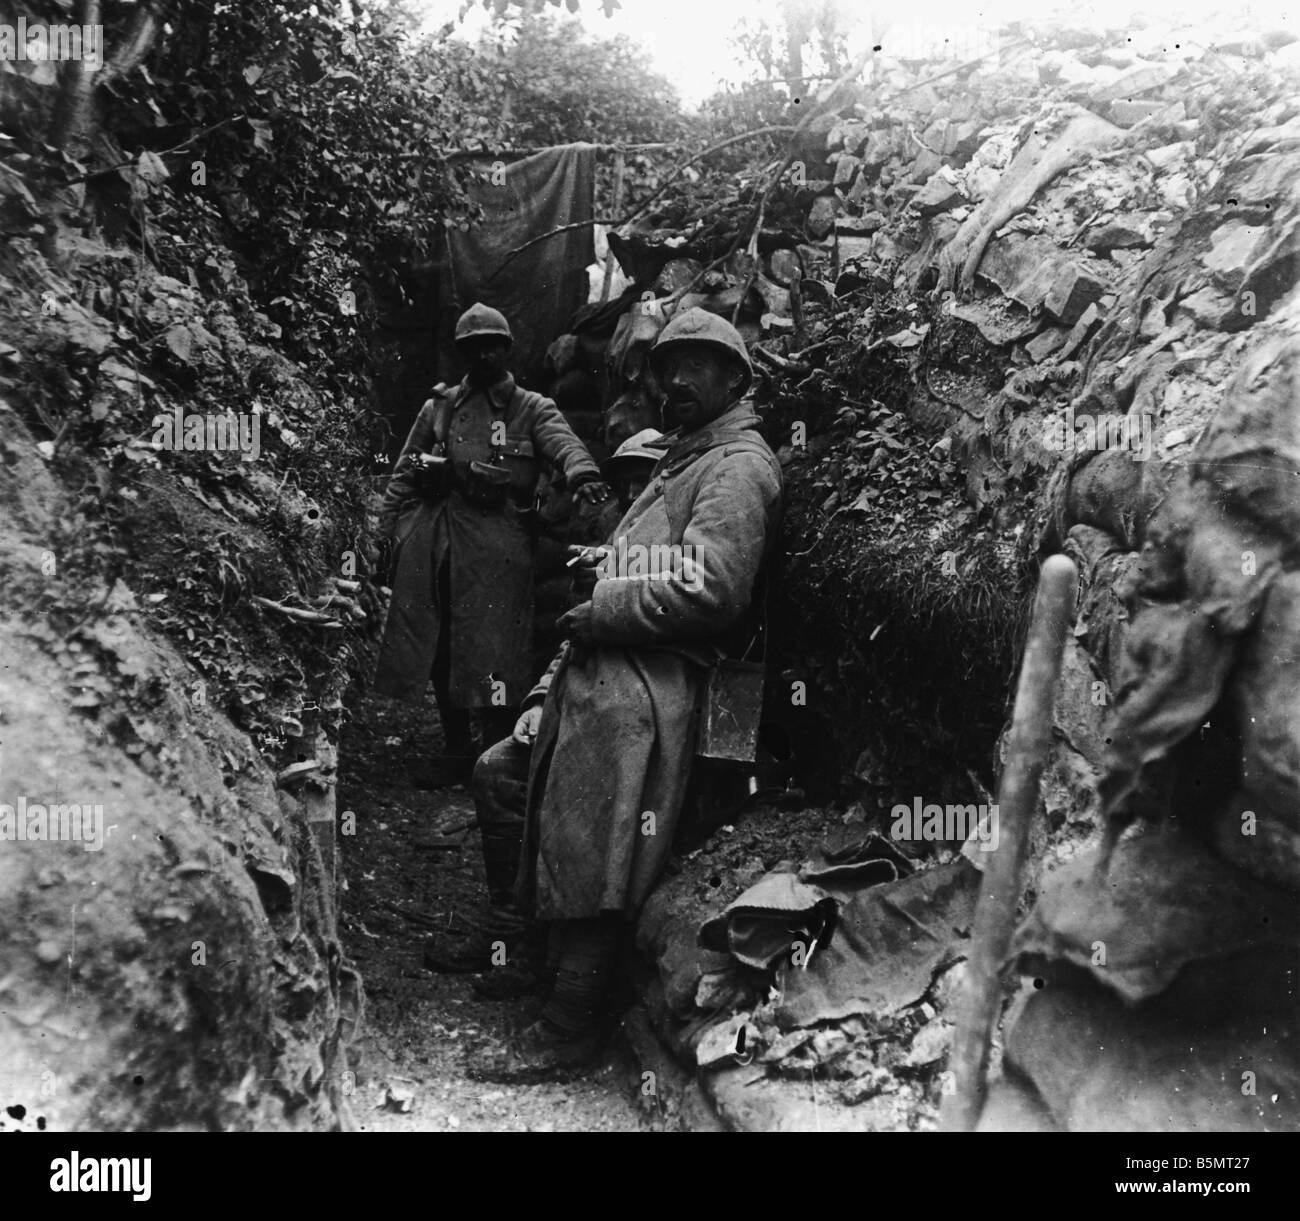 9FK 1916 6 0 A1 1 E Battle of the Somme French Positions World War One France Battle of the Somme 23rd June to 26th November 191 Stock Photo